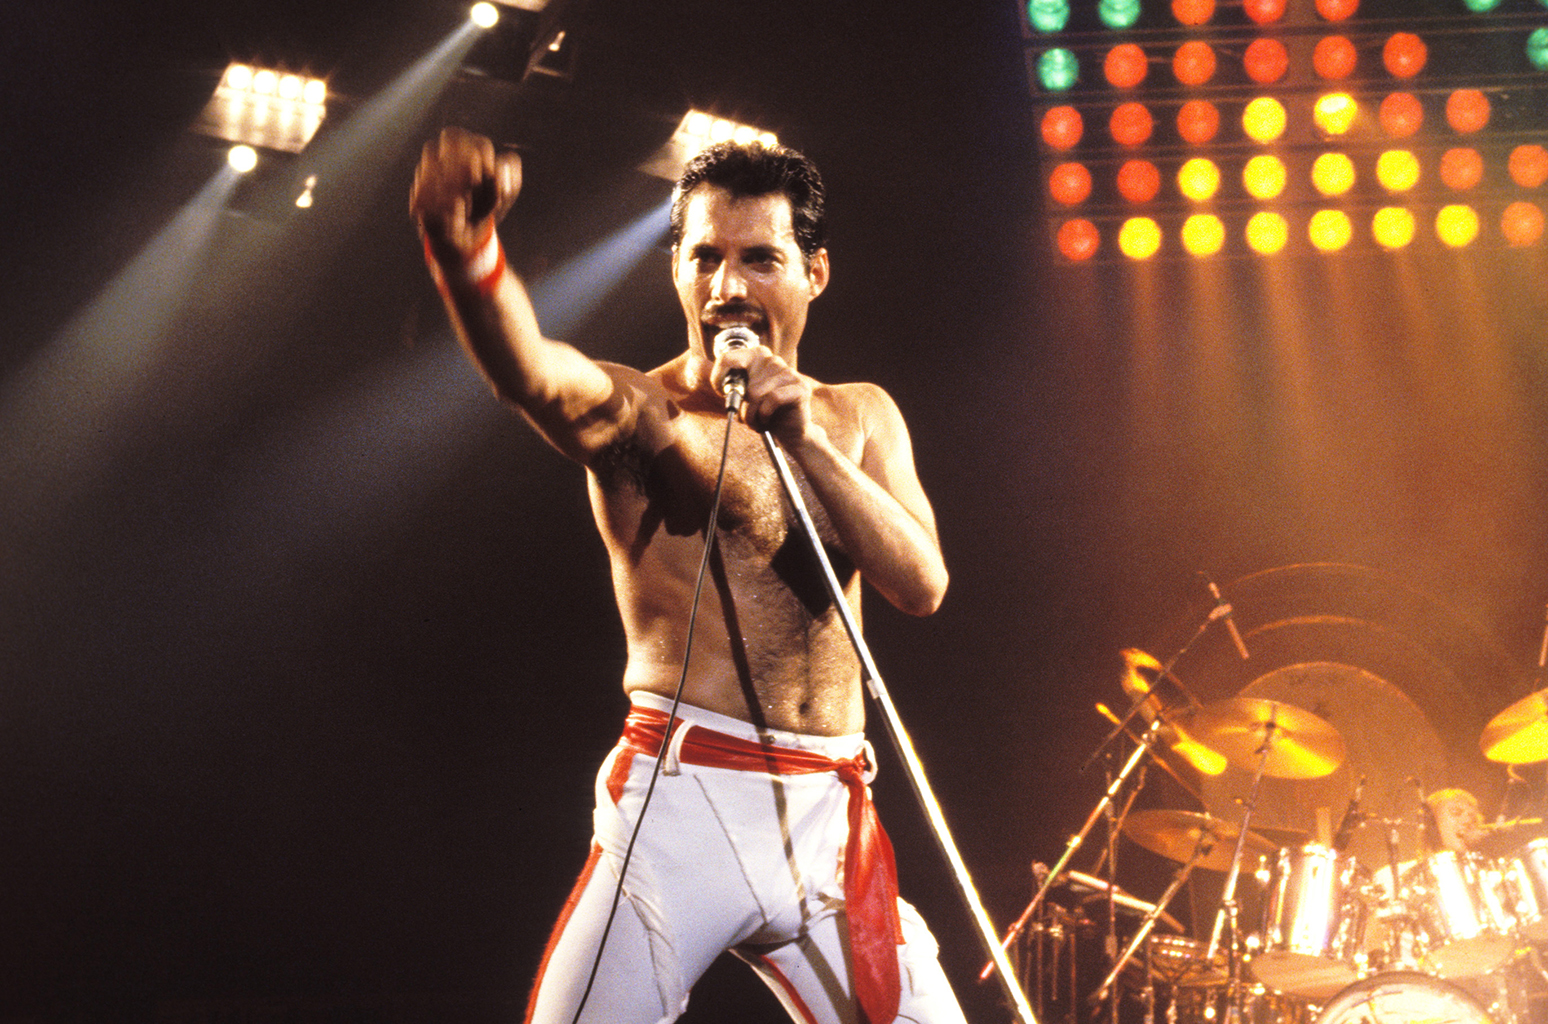 If You Get Less Than 10 on This Mandela Effect Quiz, You're Probably in Alternate Reality Freddie Mercury of Queen